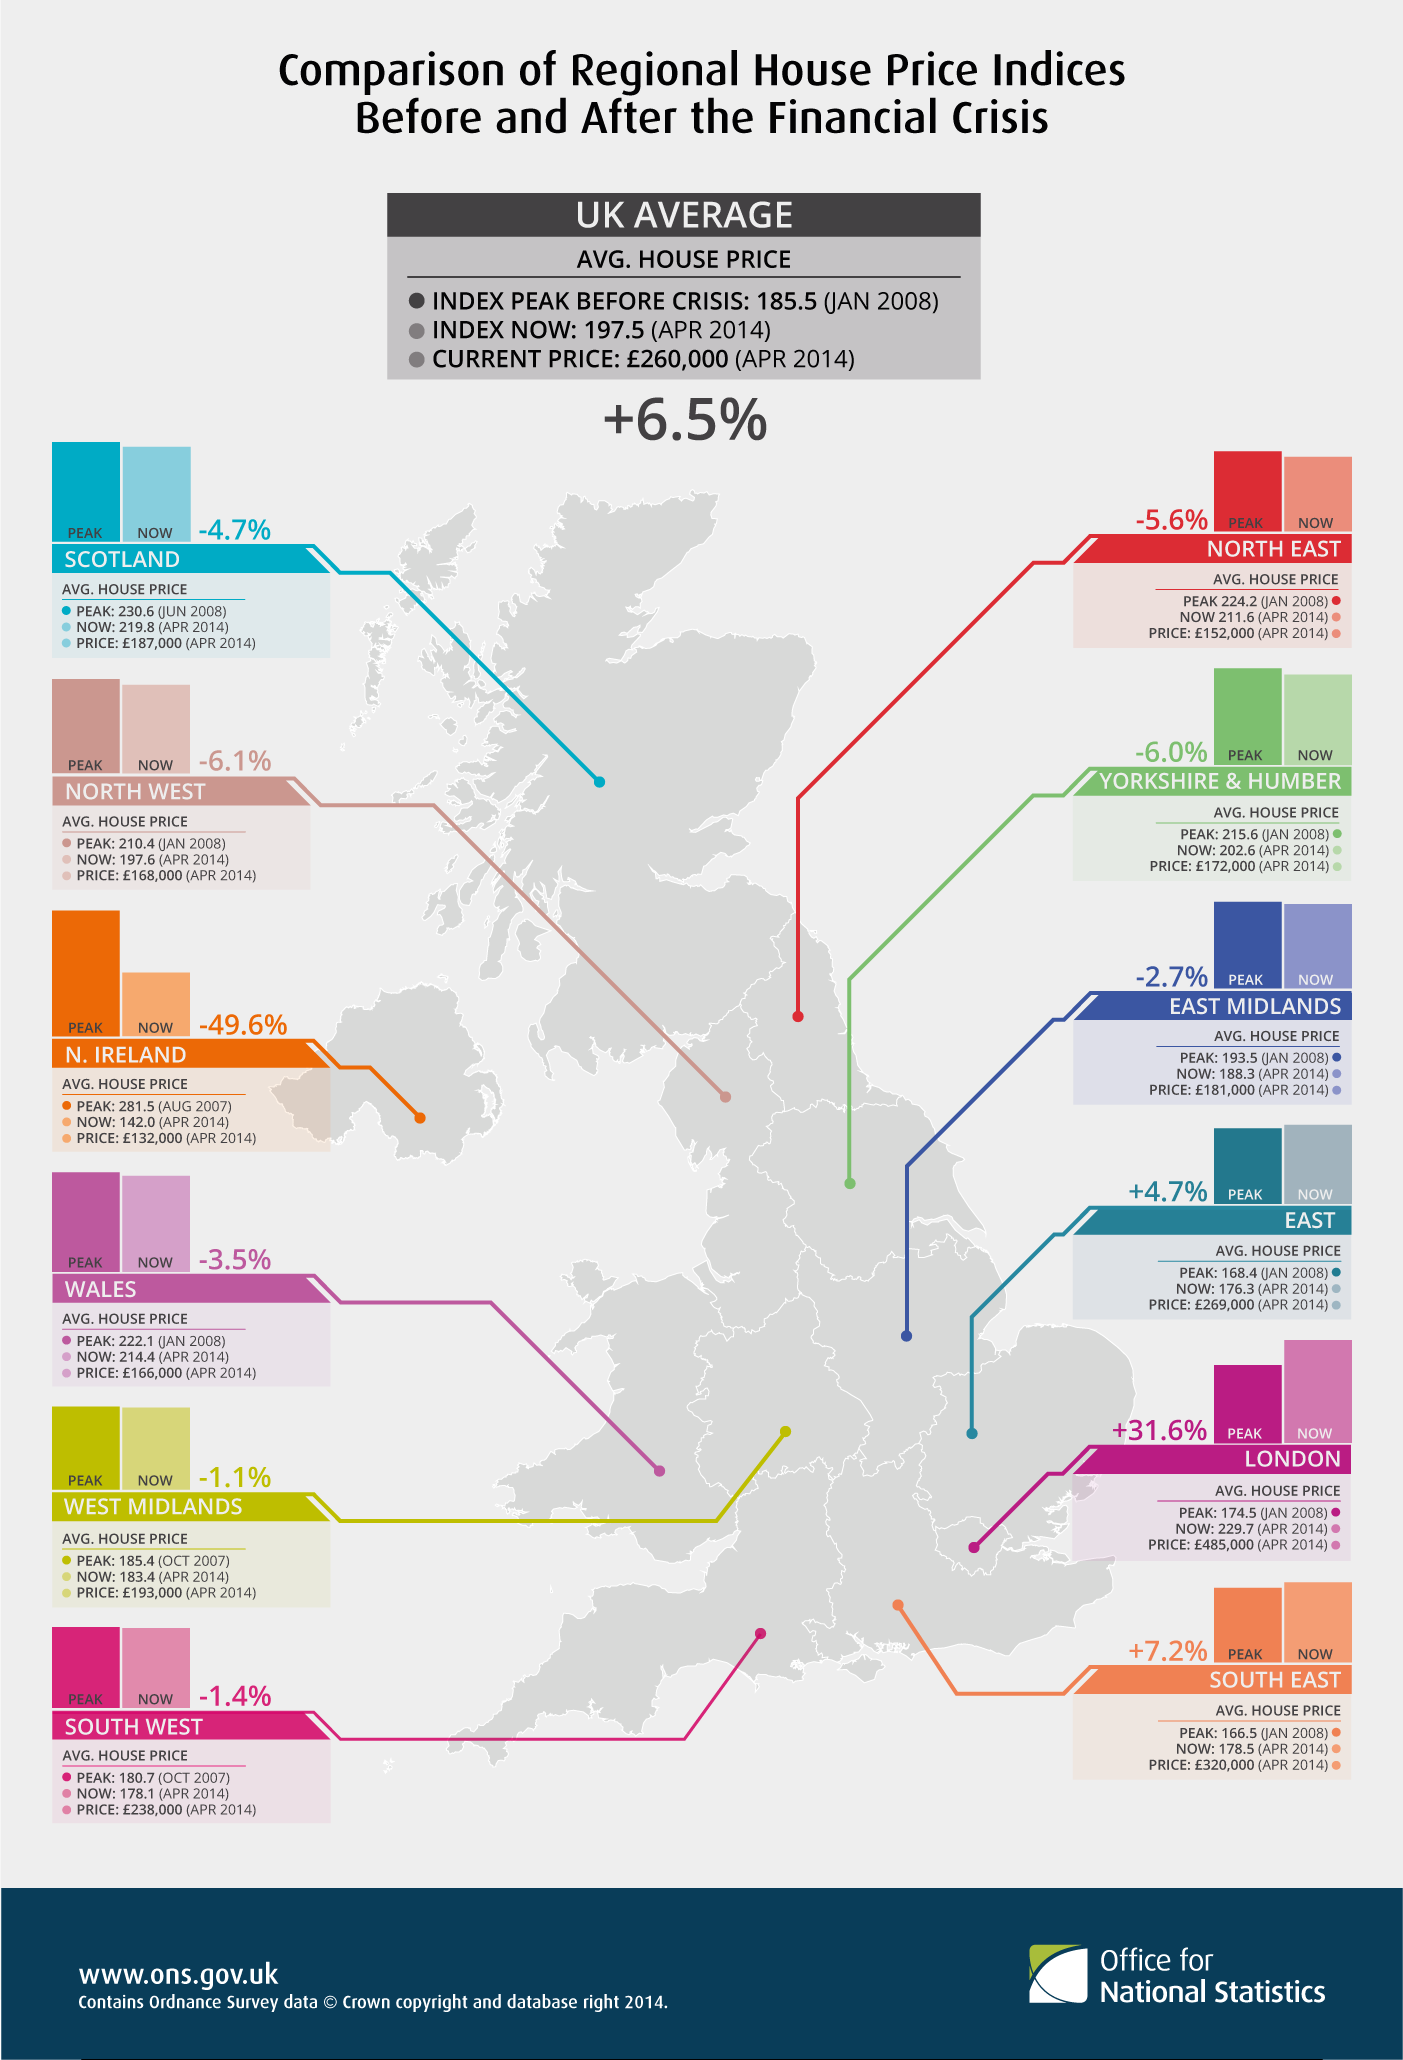 Comparison of Regional House Prices Indices BEFORE and AFTER the Financial Crisis (2014)